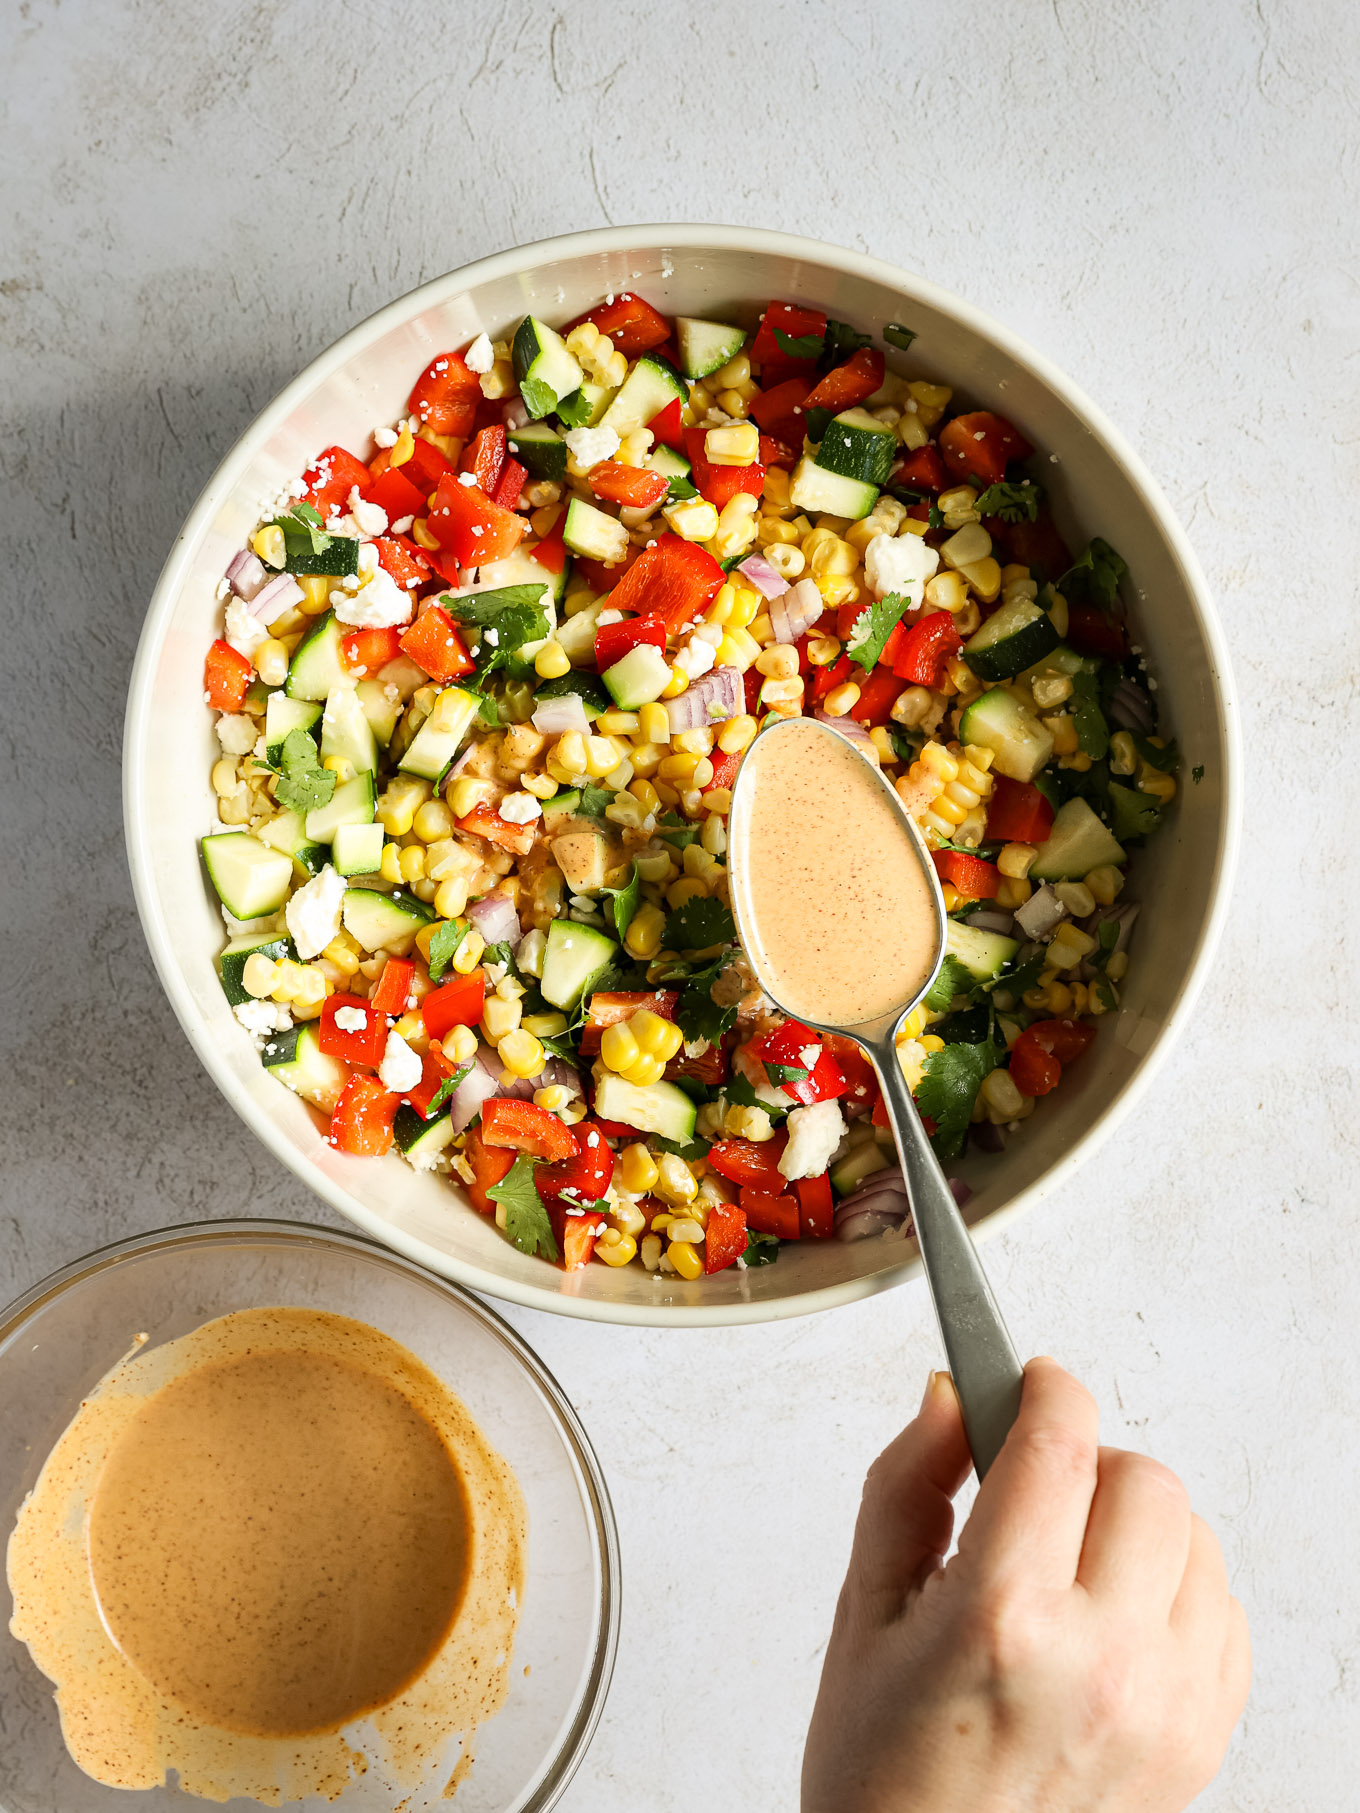 chopped up salad with dressing over it.